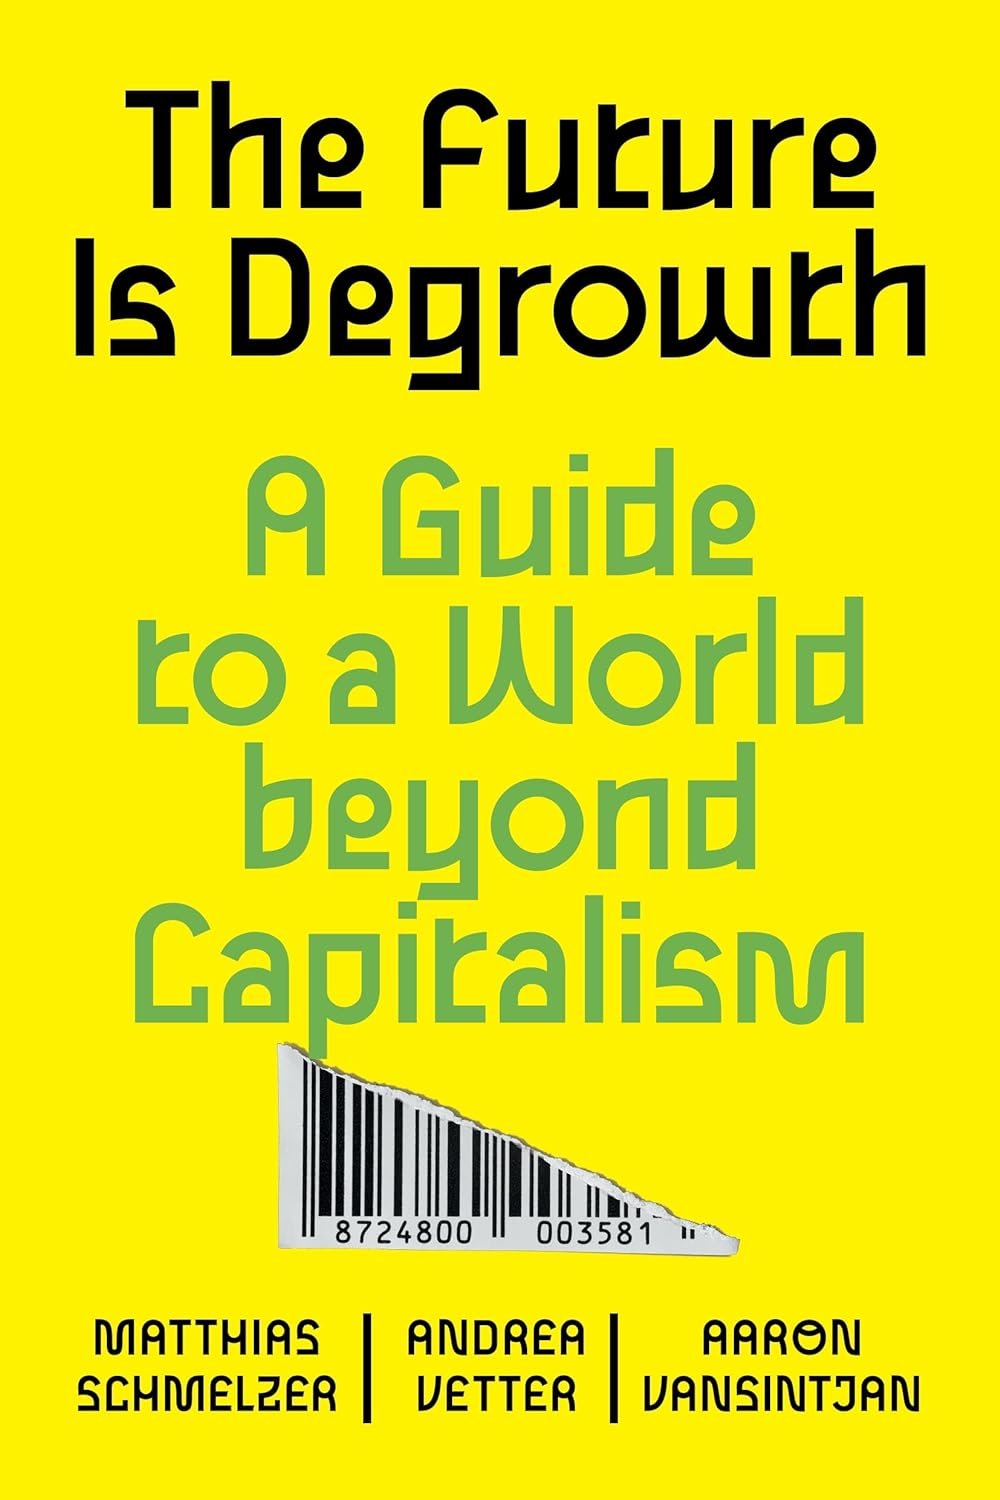 The Future is Degrowth: A Guide to a World Beyond Capitalism